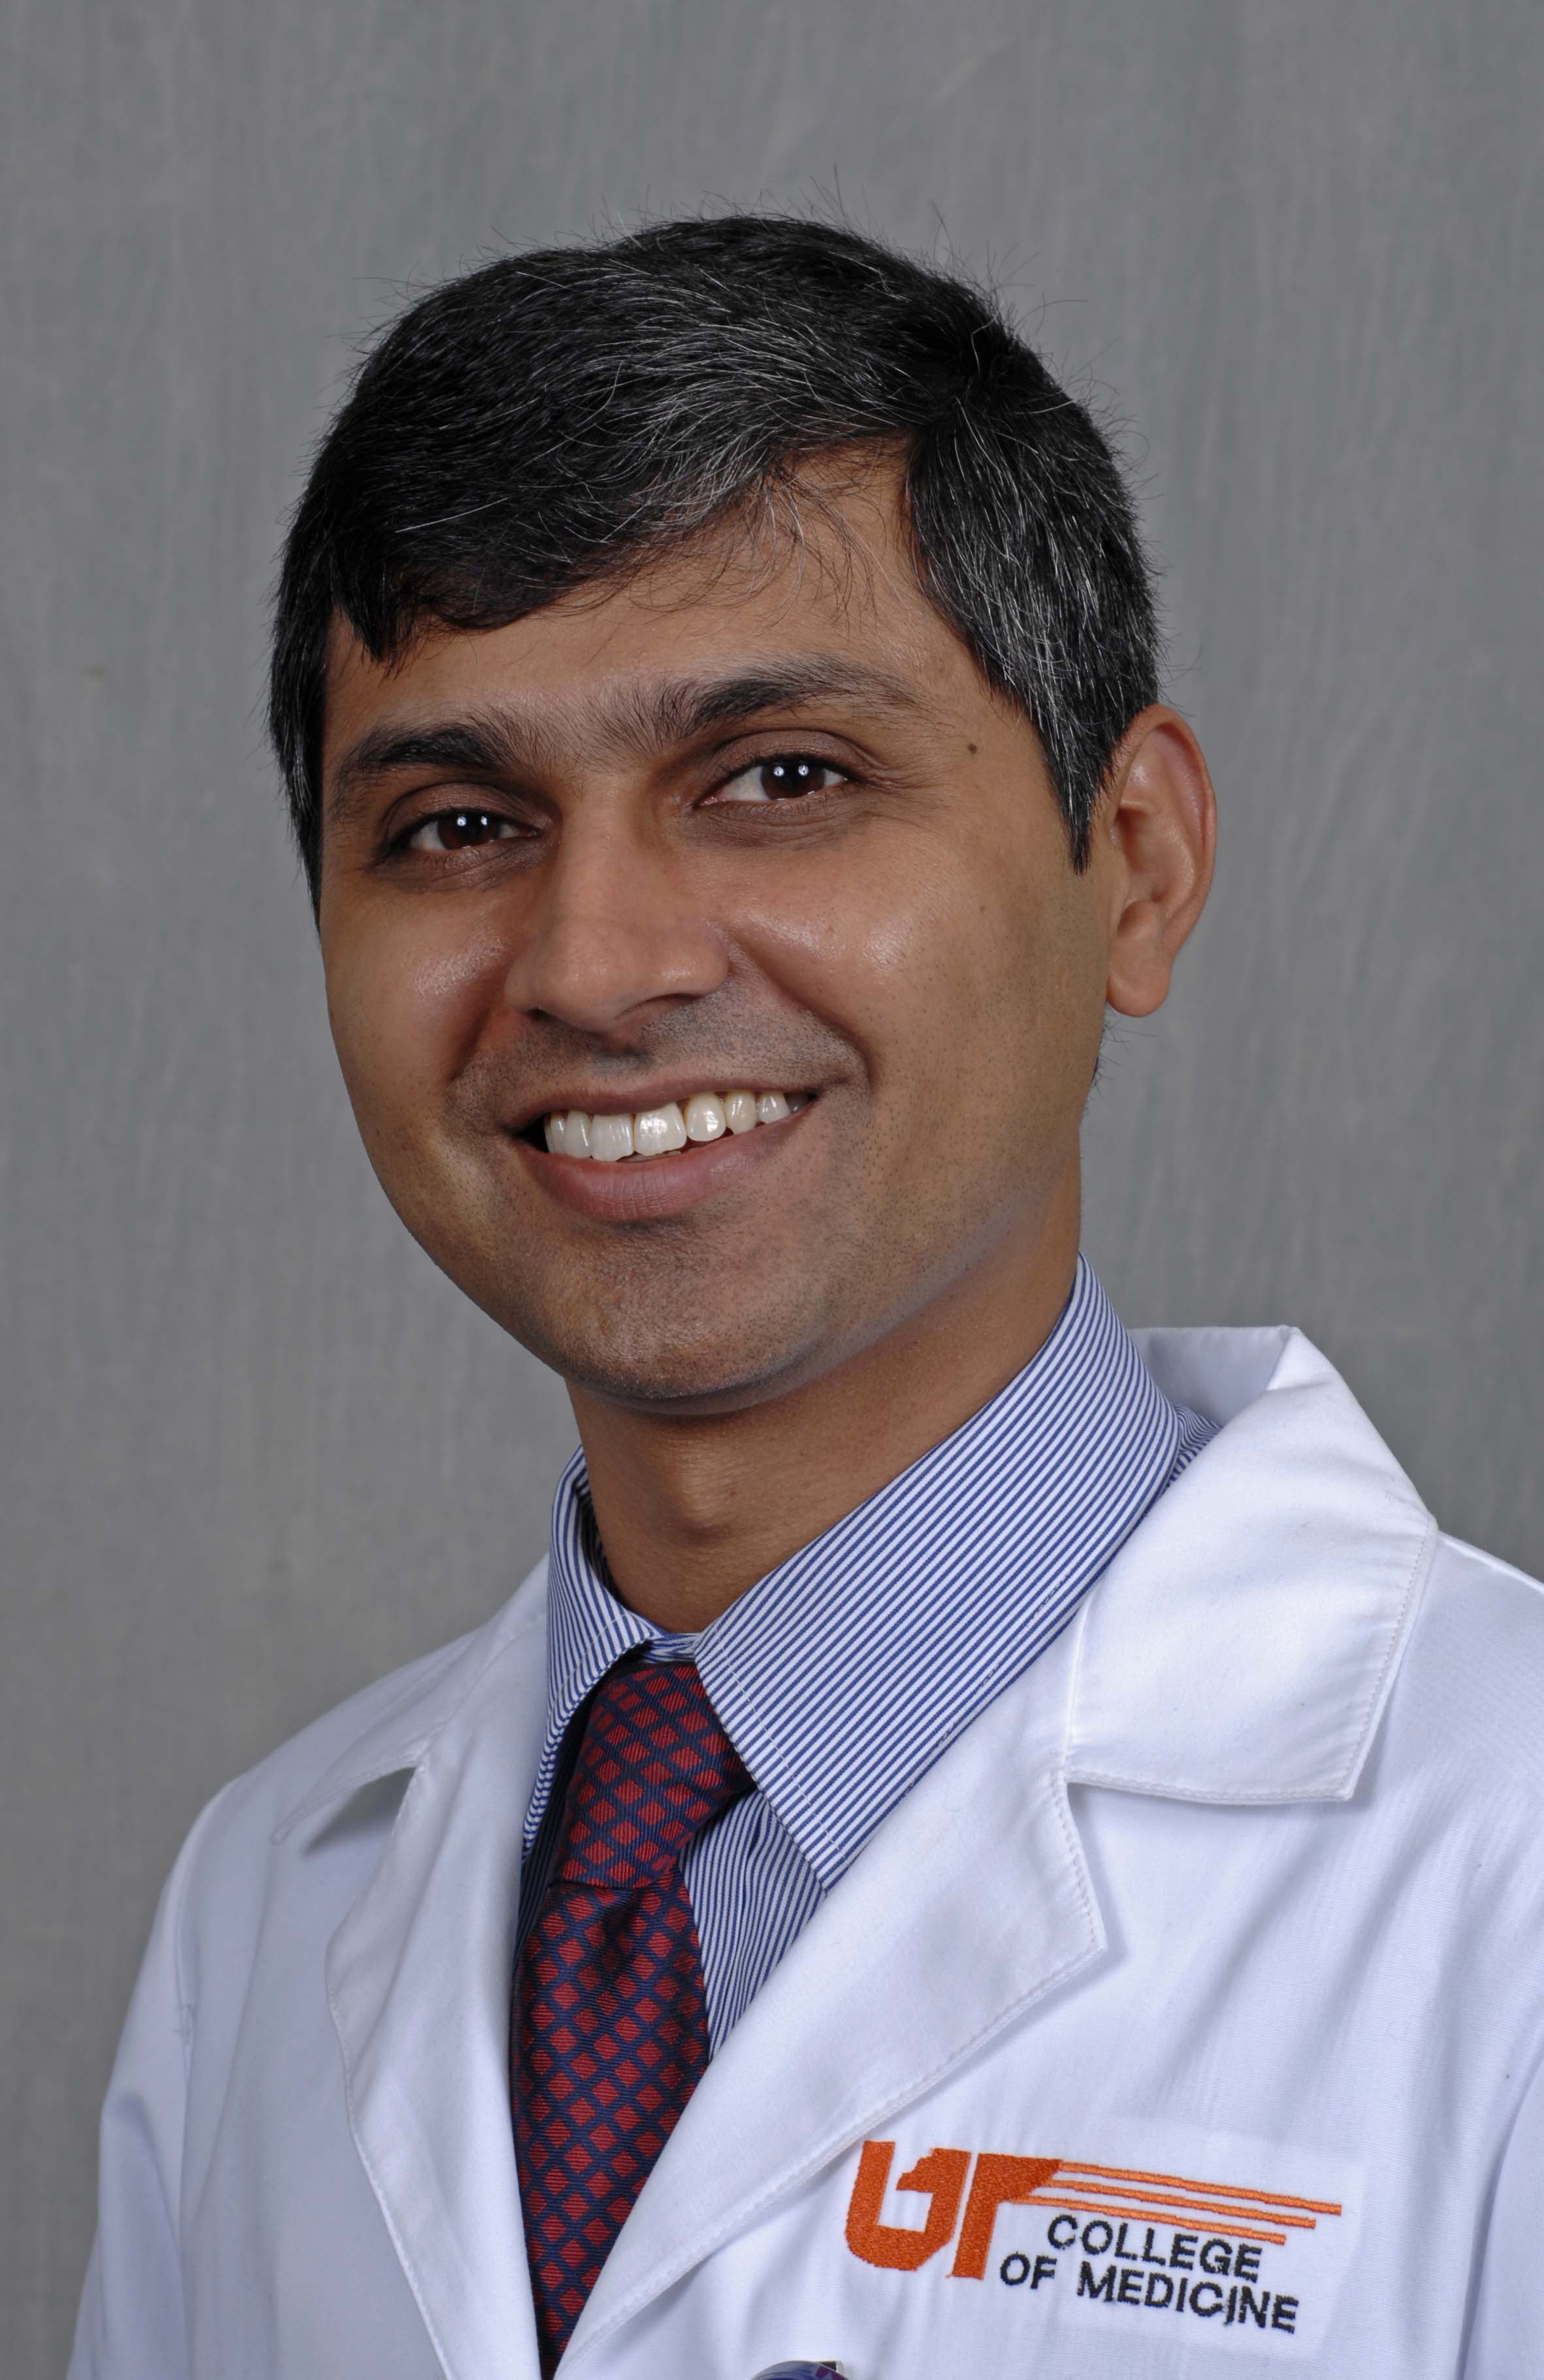 Two Erlanger physicians attain board certification in gastroenterology subspecialty